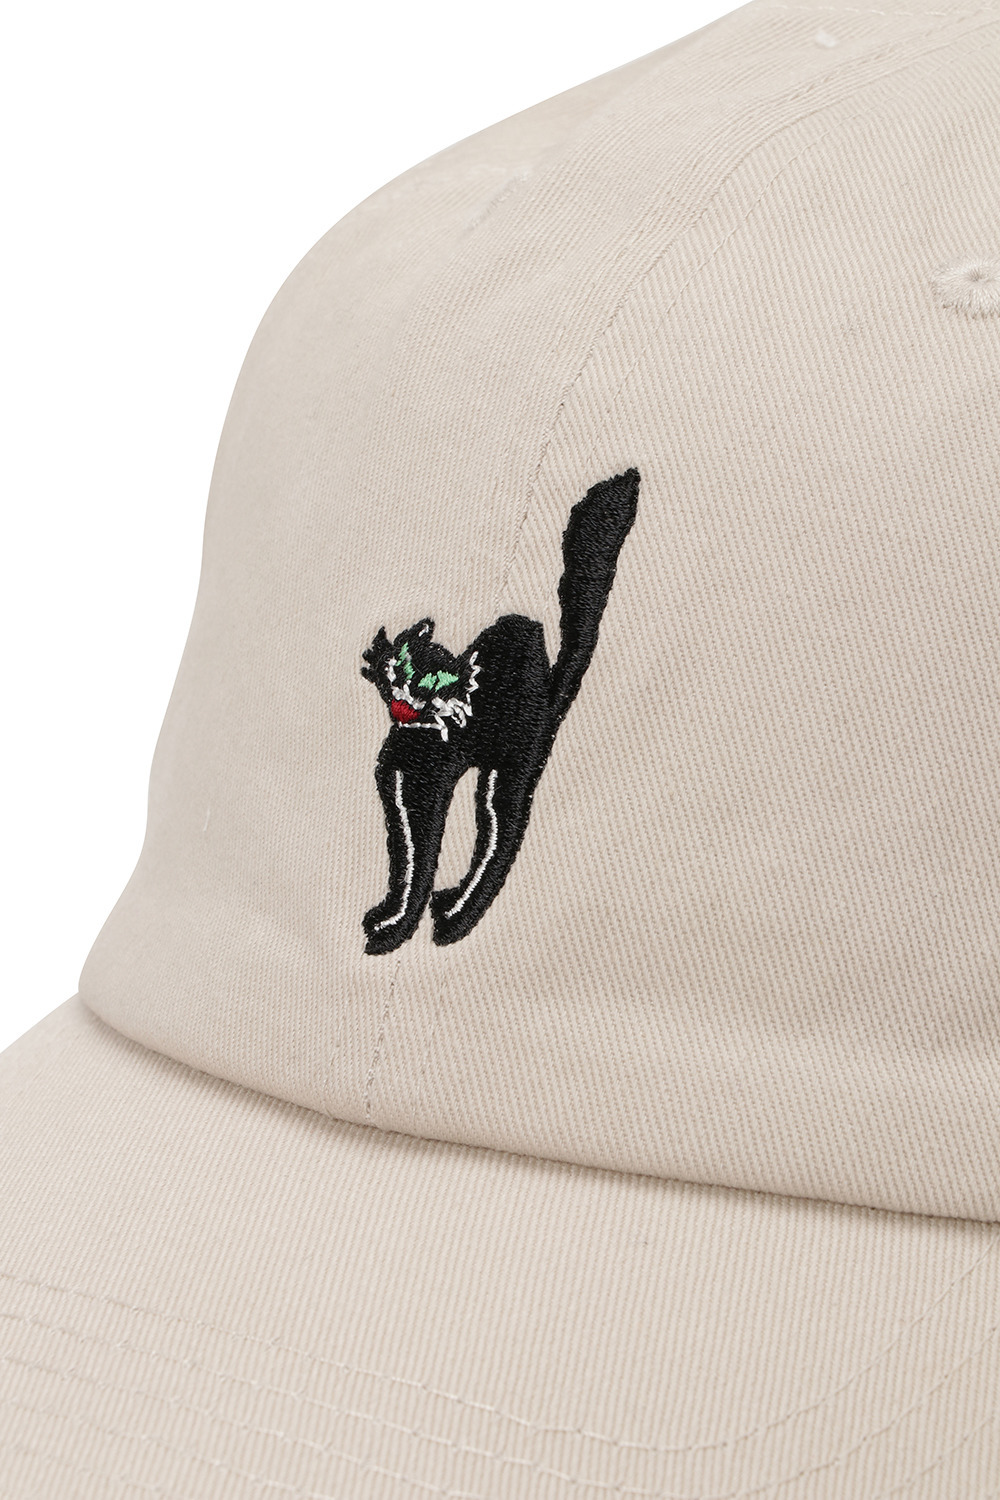 CAT Embroidery キャップ 詳細画像 ブラック 3